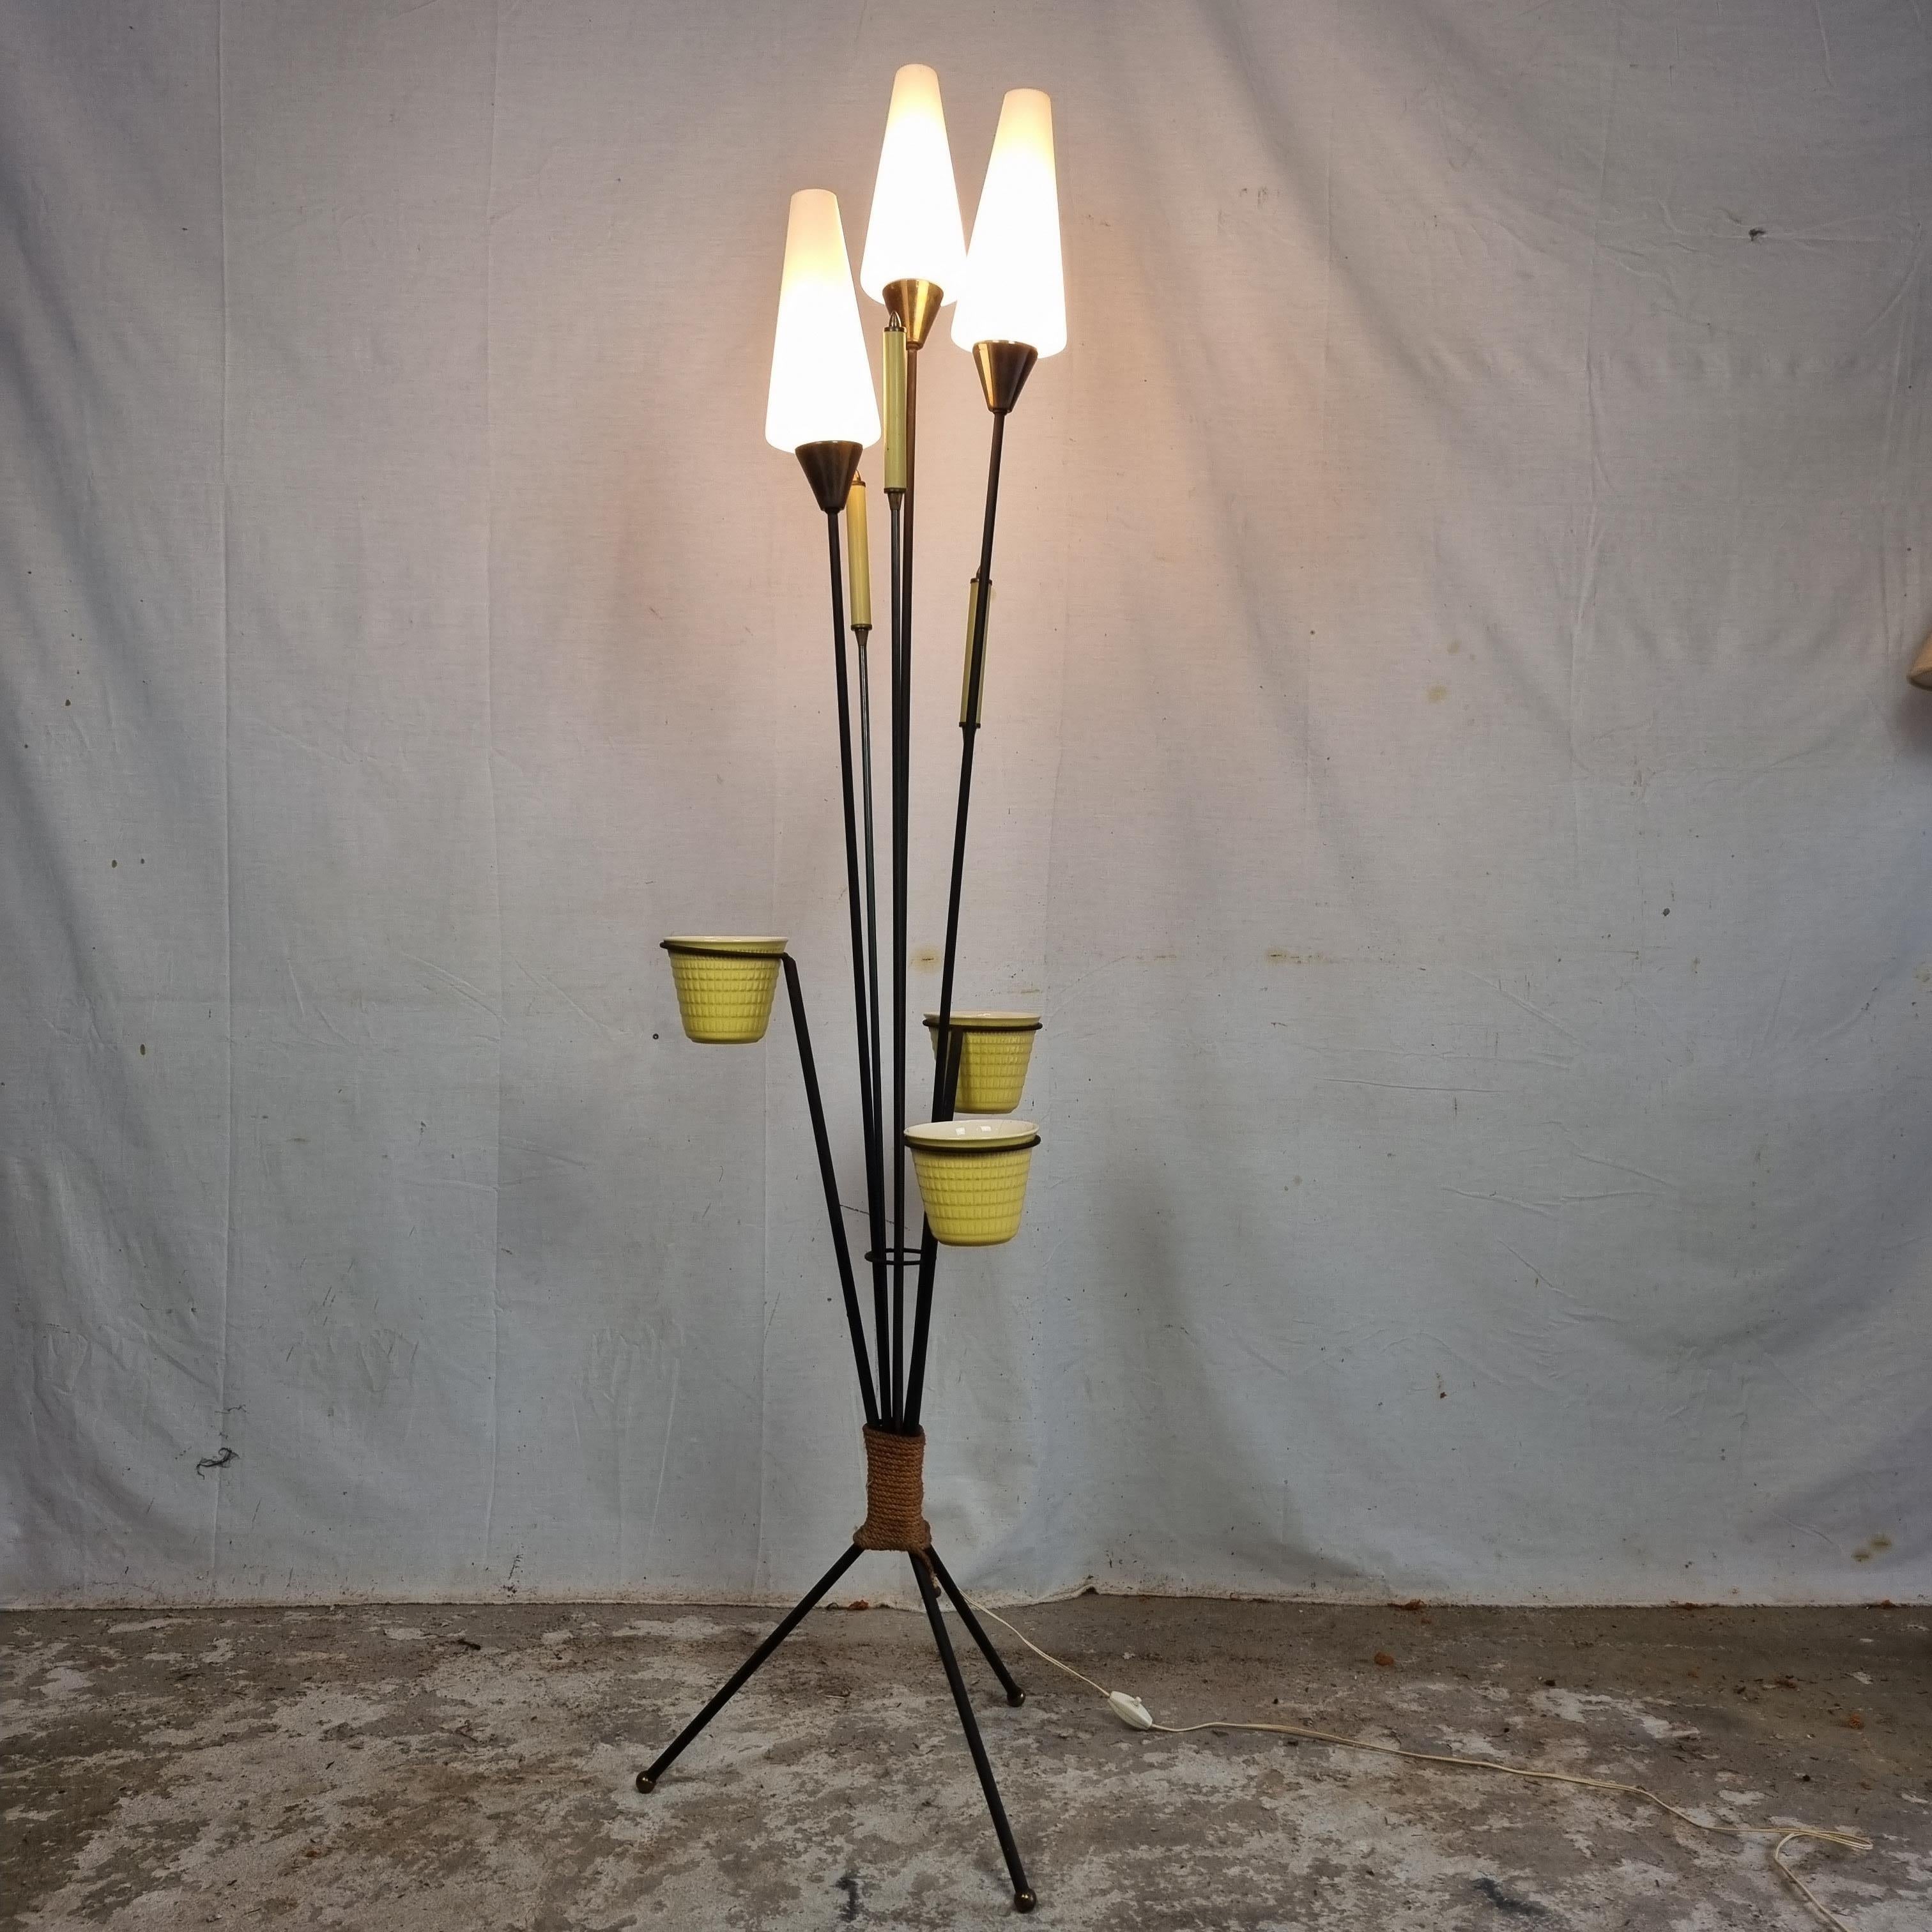 Gorgeous Rare French 🇫🇷 Vintage three legged Floor Lamp with Plant Holder from the 1950s on Metal Legs (Tripod).

Still entirely in the original state, they are rarely seen complete, equipped with opaline shades, 3 candle-shaped details, finished